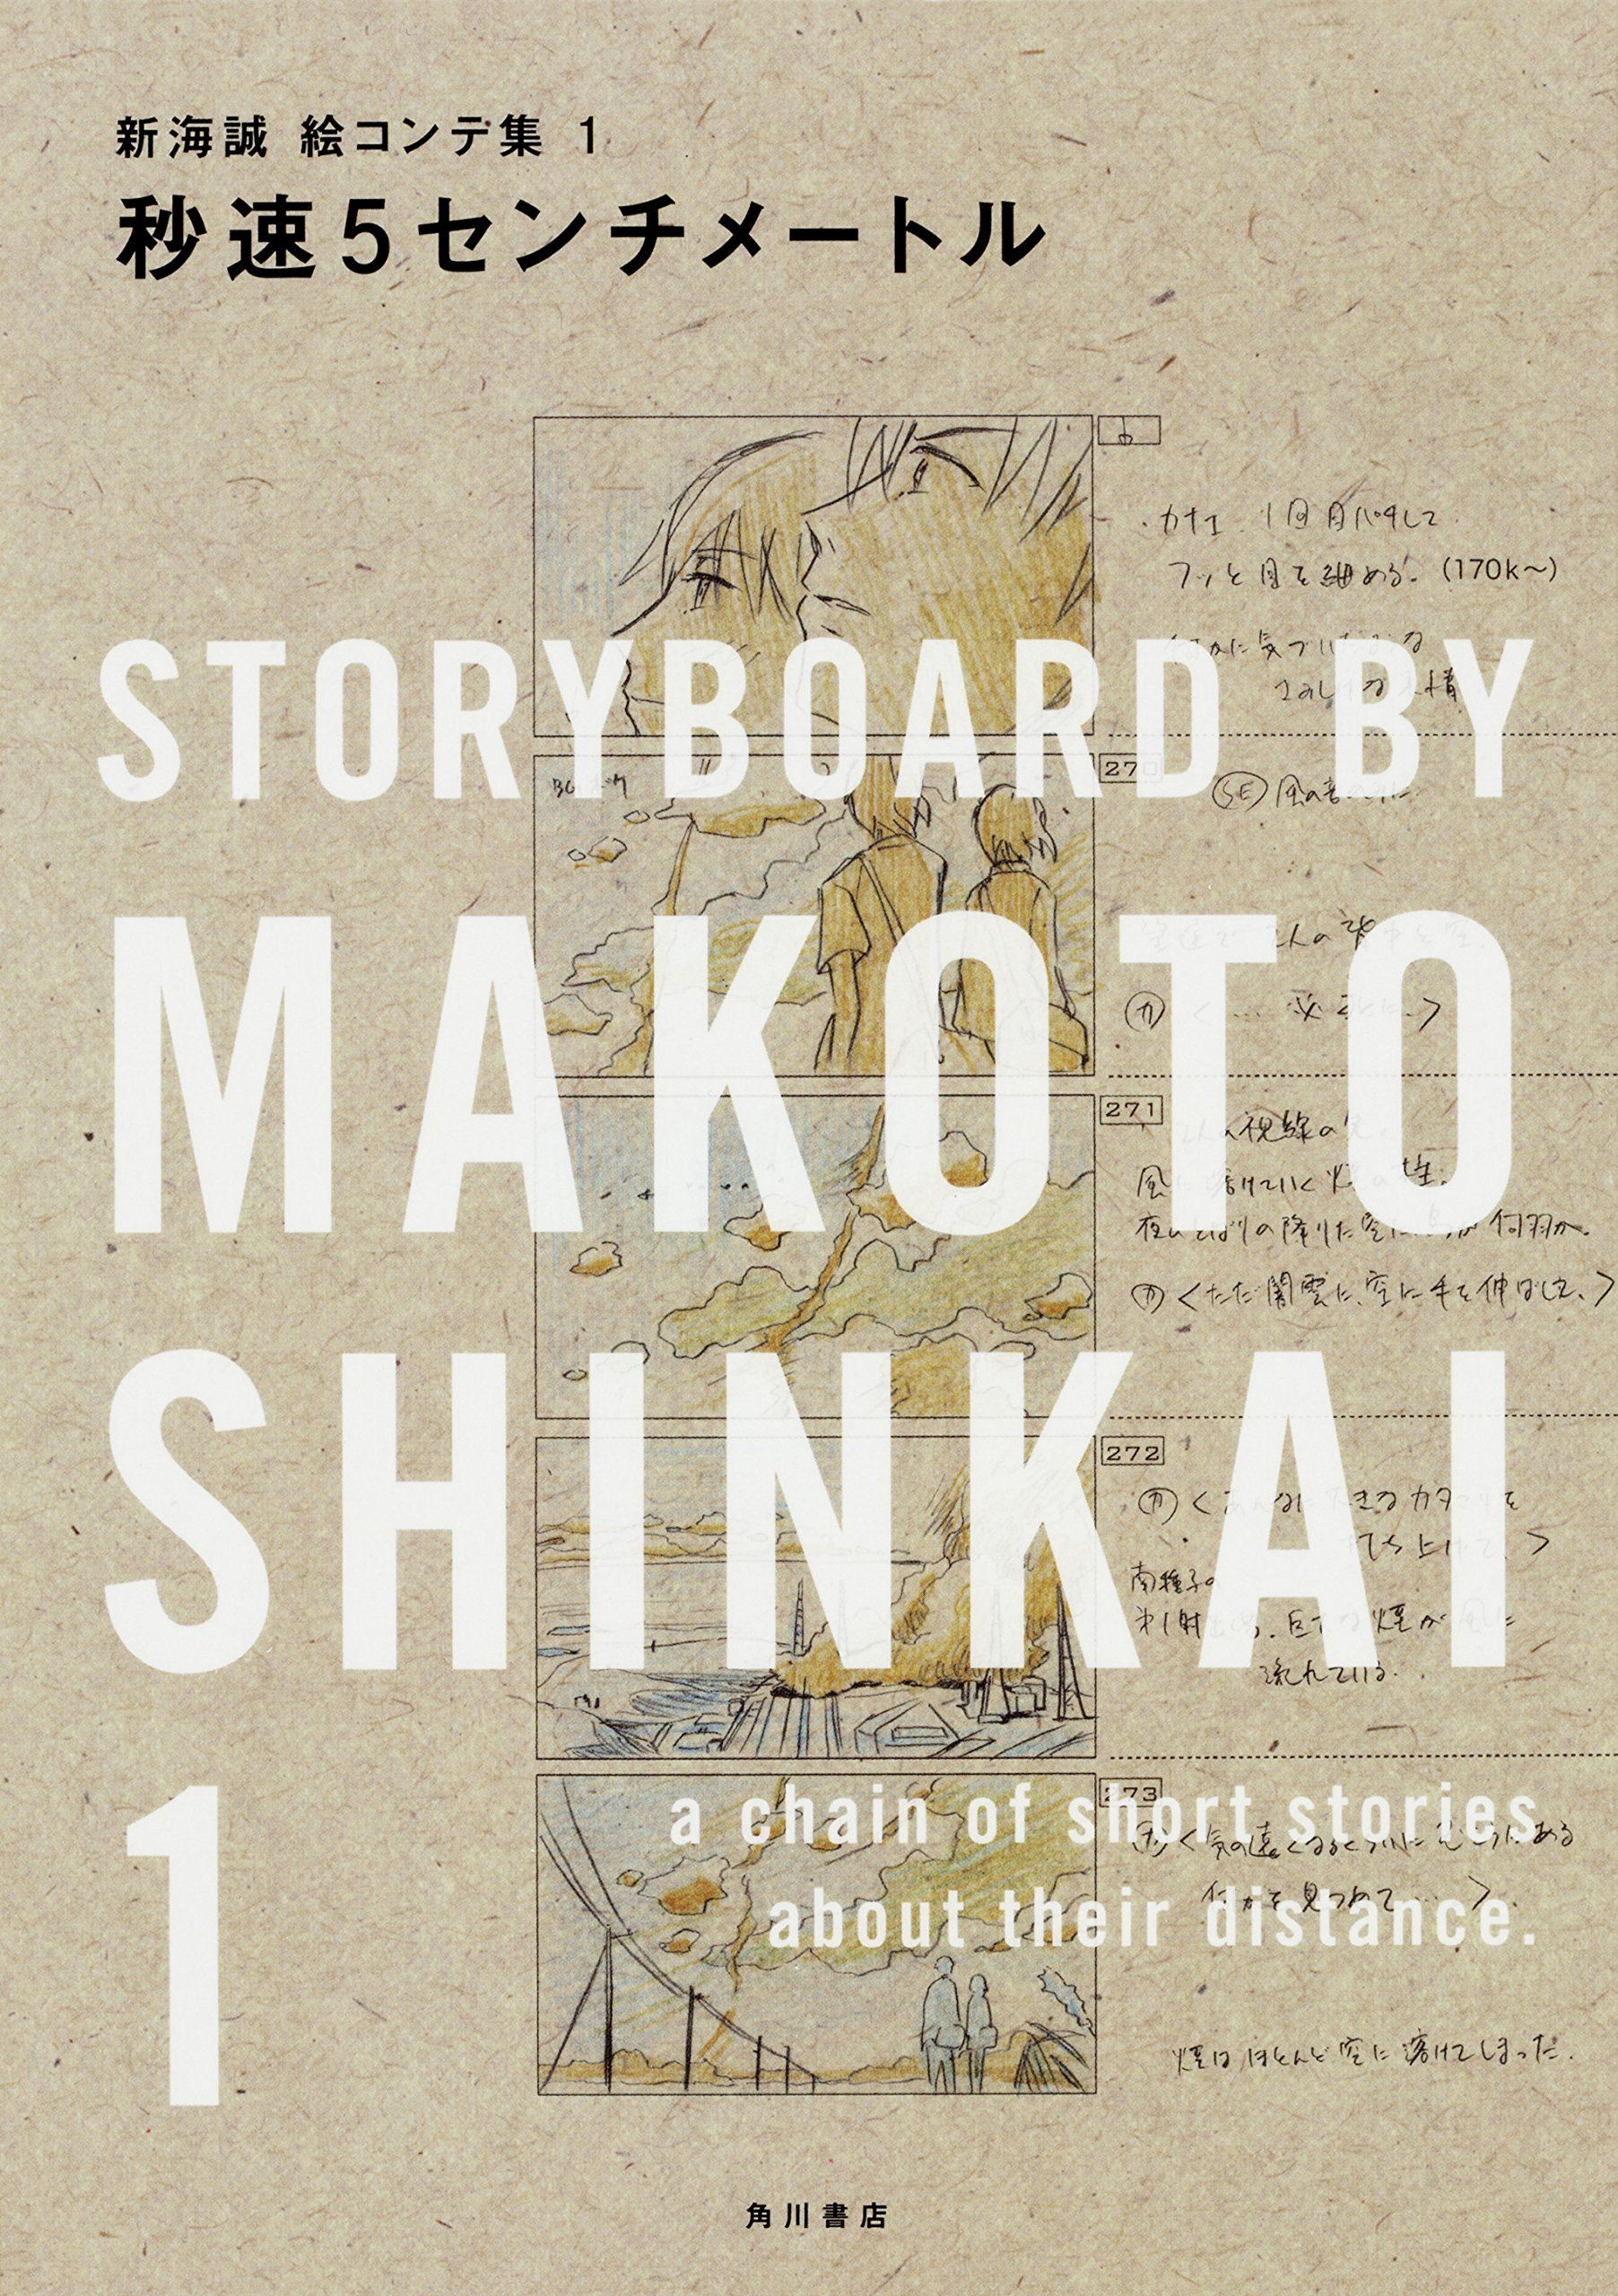 5 Centimeters Per Second A Chain Of Short Stories About Their Distance Shinkai Makoto Storyboards Collection